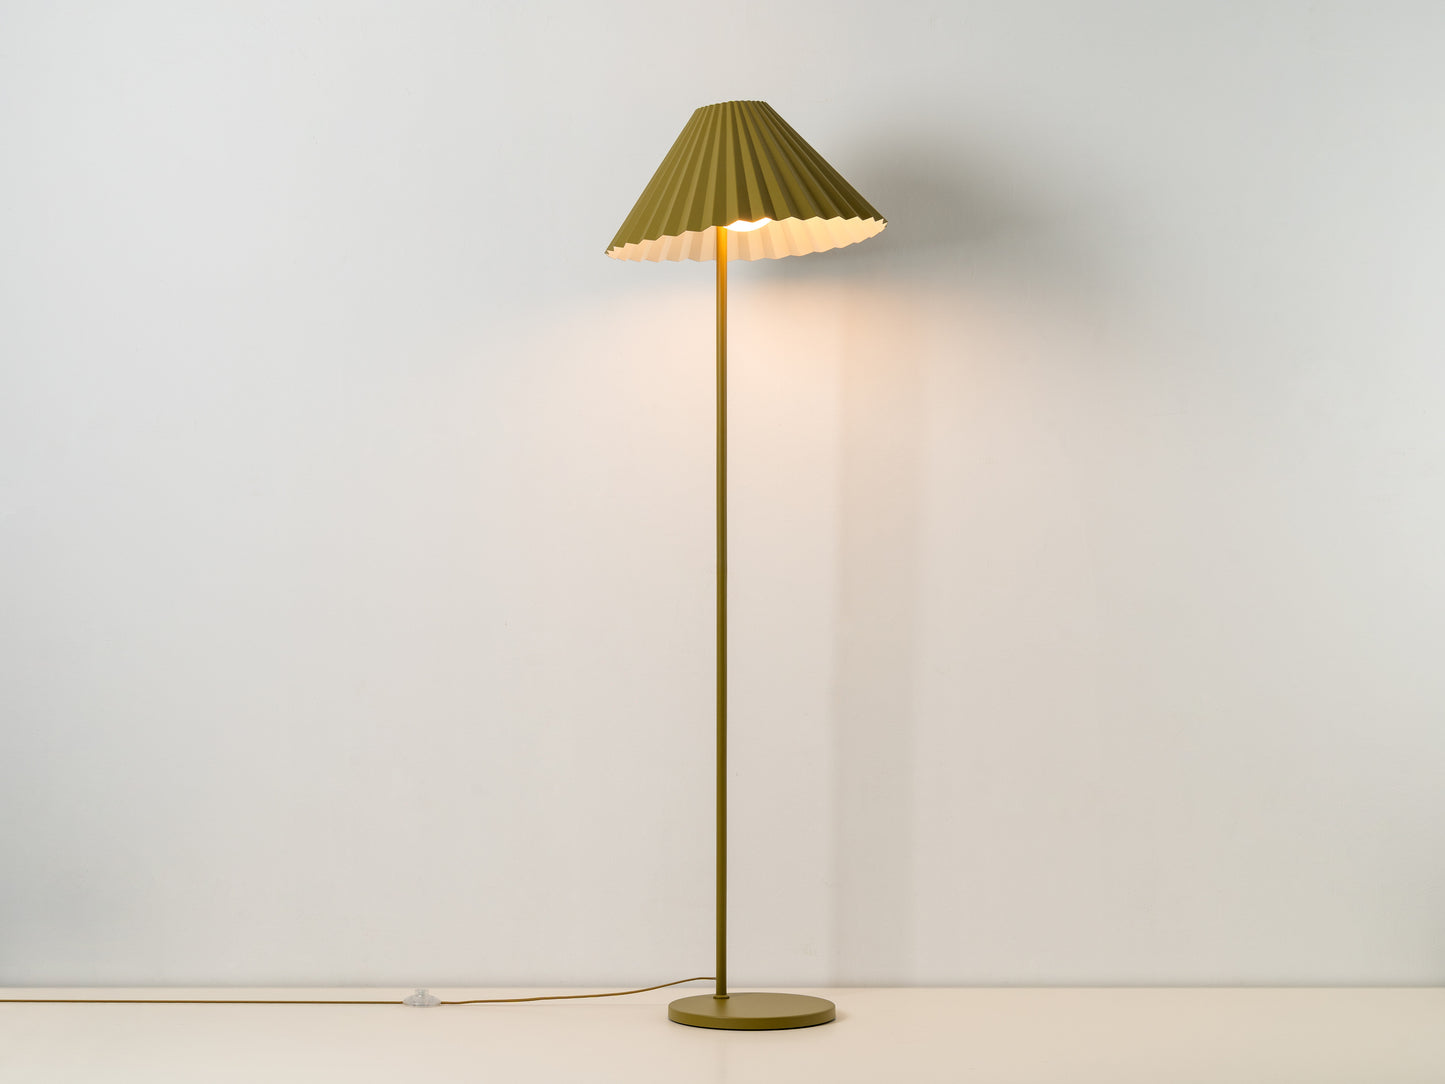 The Pleat Reading Floor Lamp, product shot